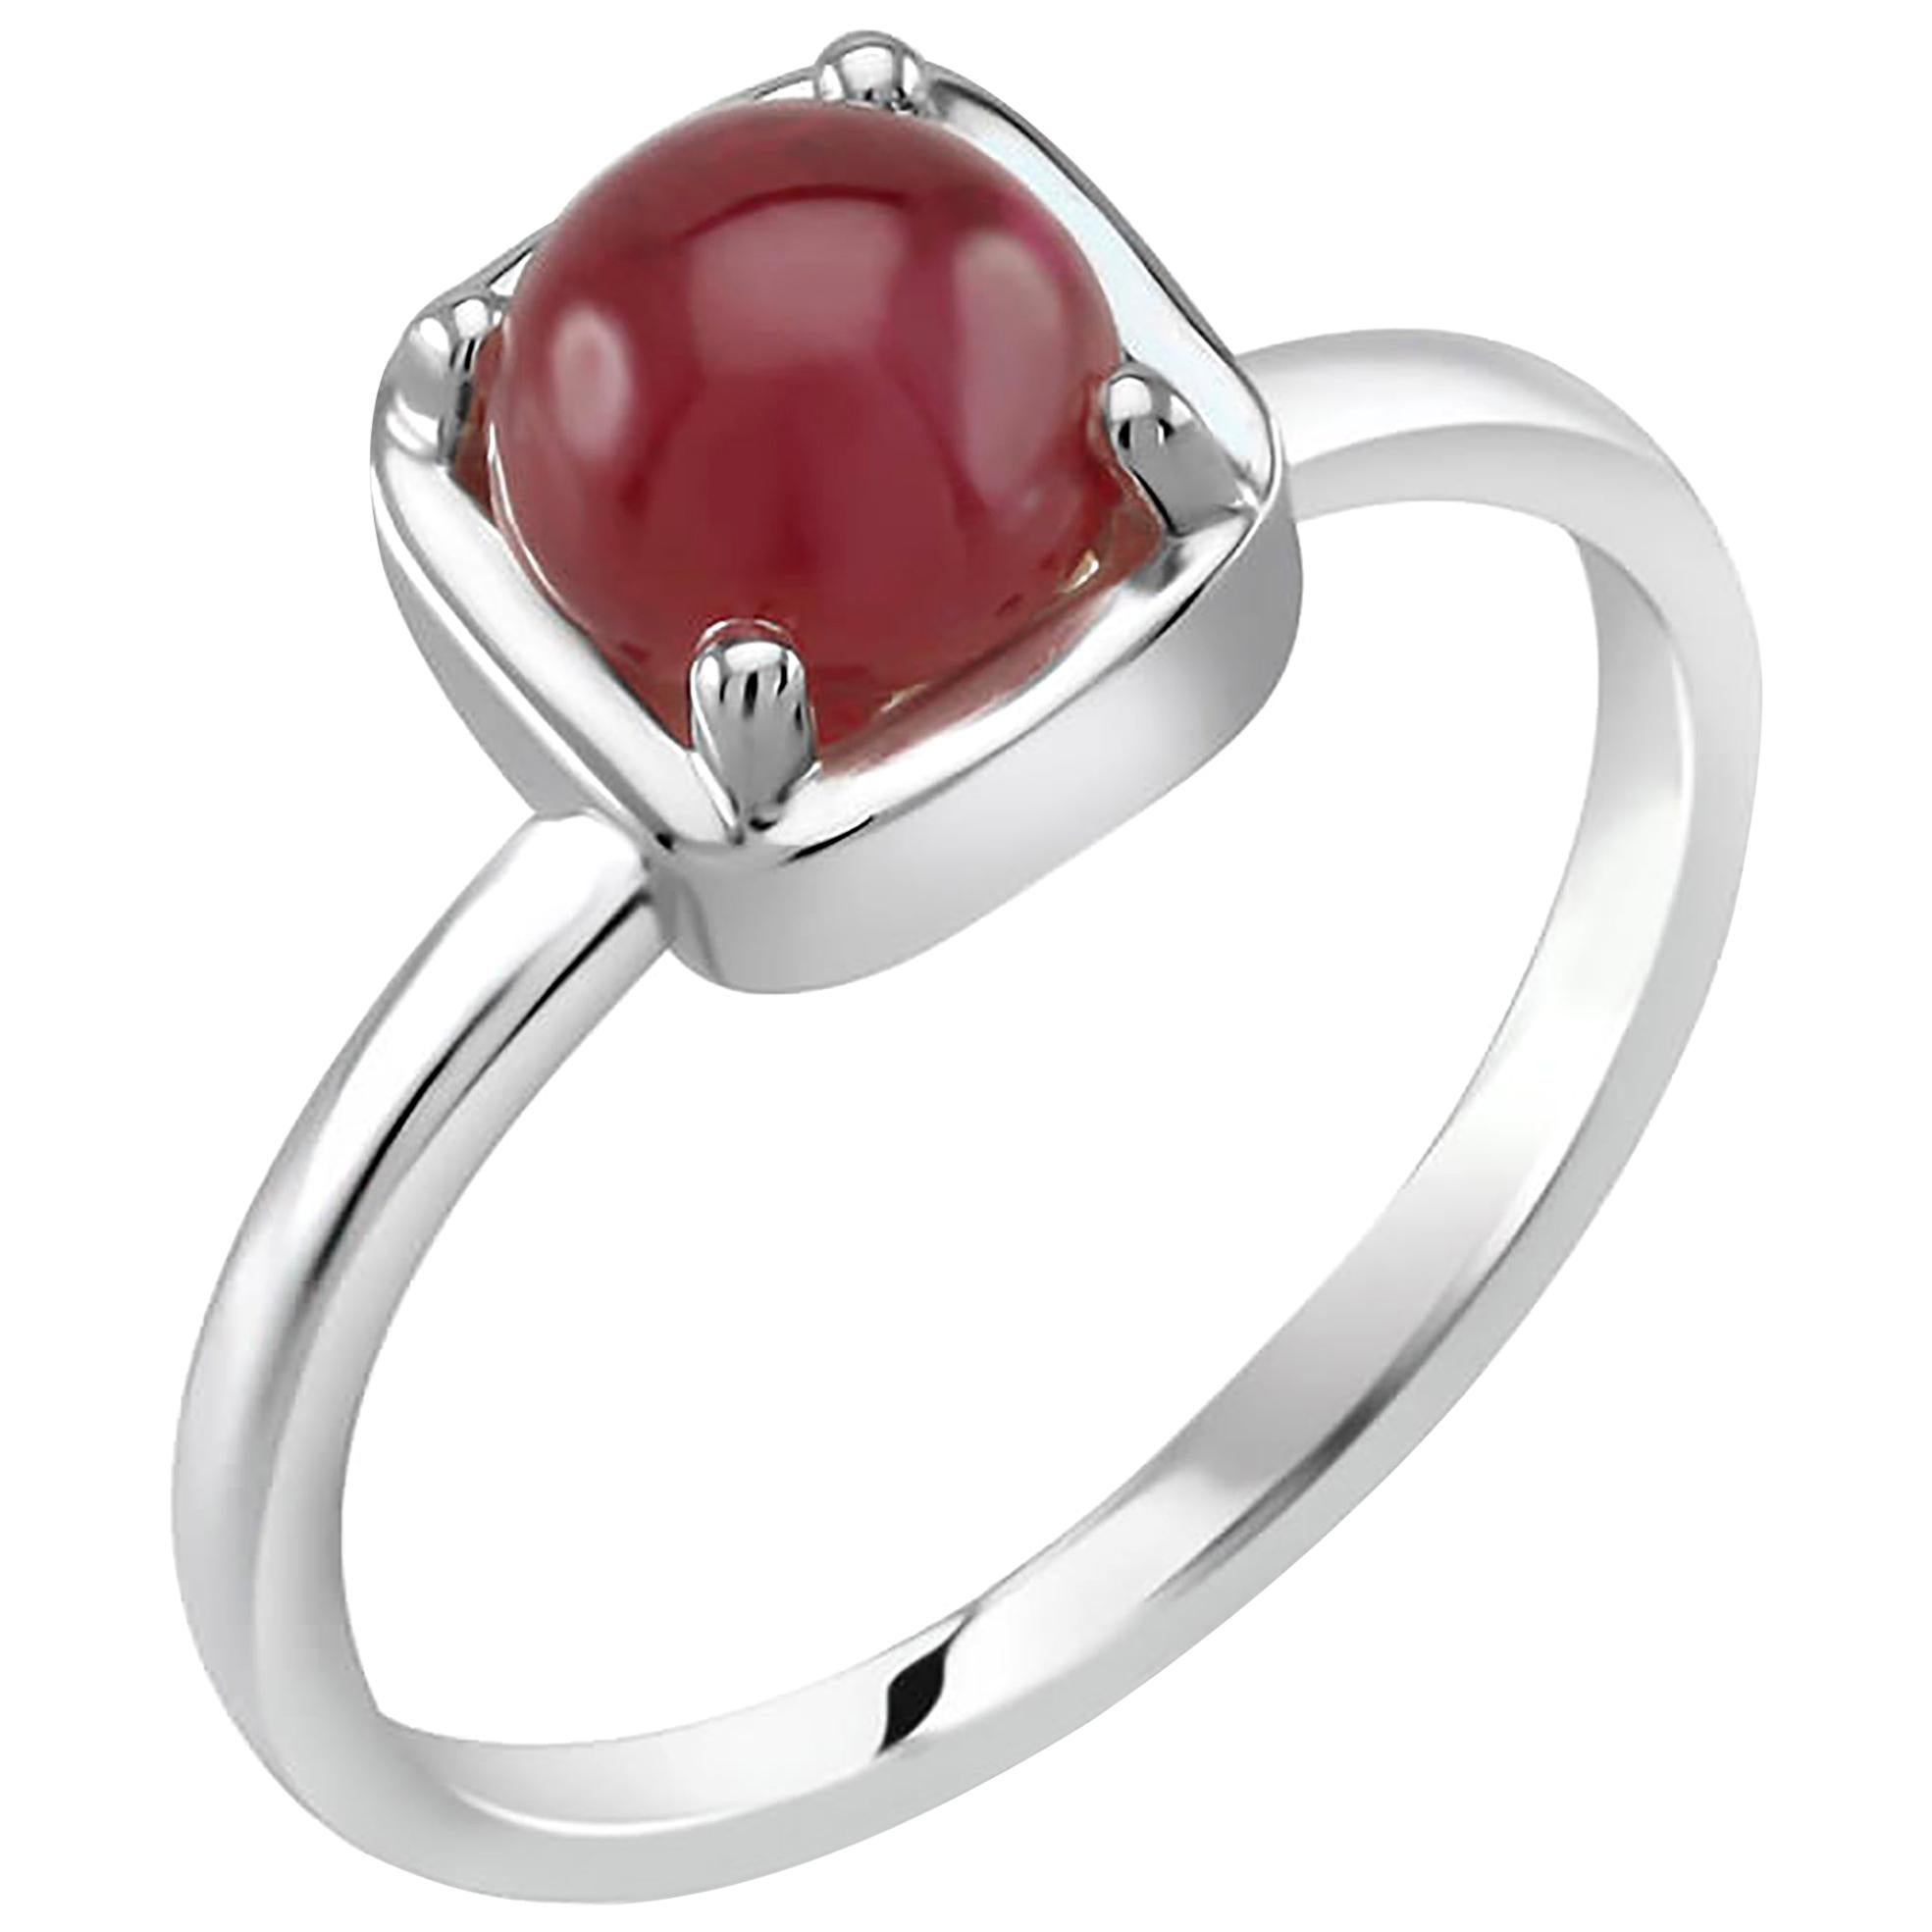 Cabochon Ruby Solitaire Sterling Silver Ring White Gold Plate